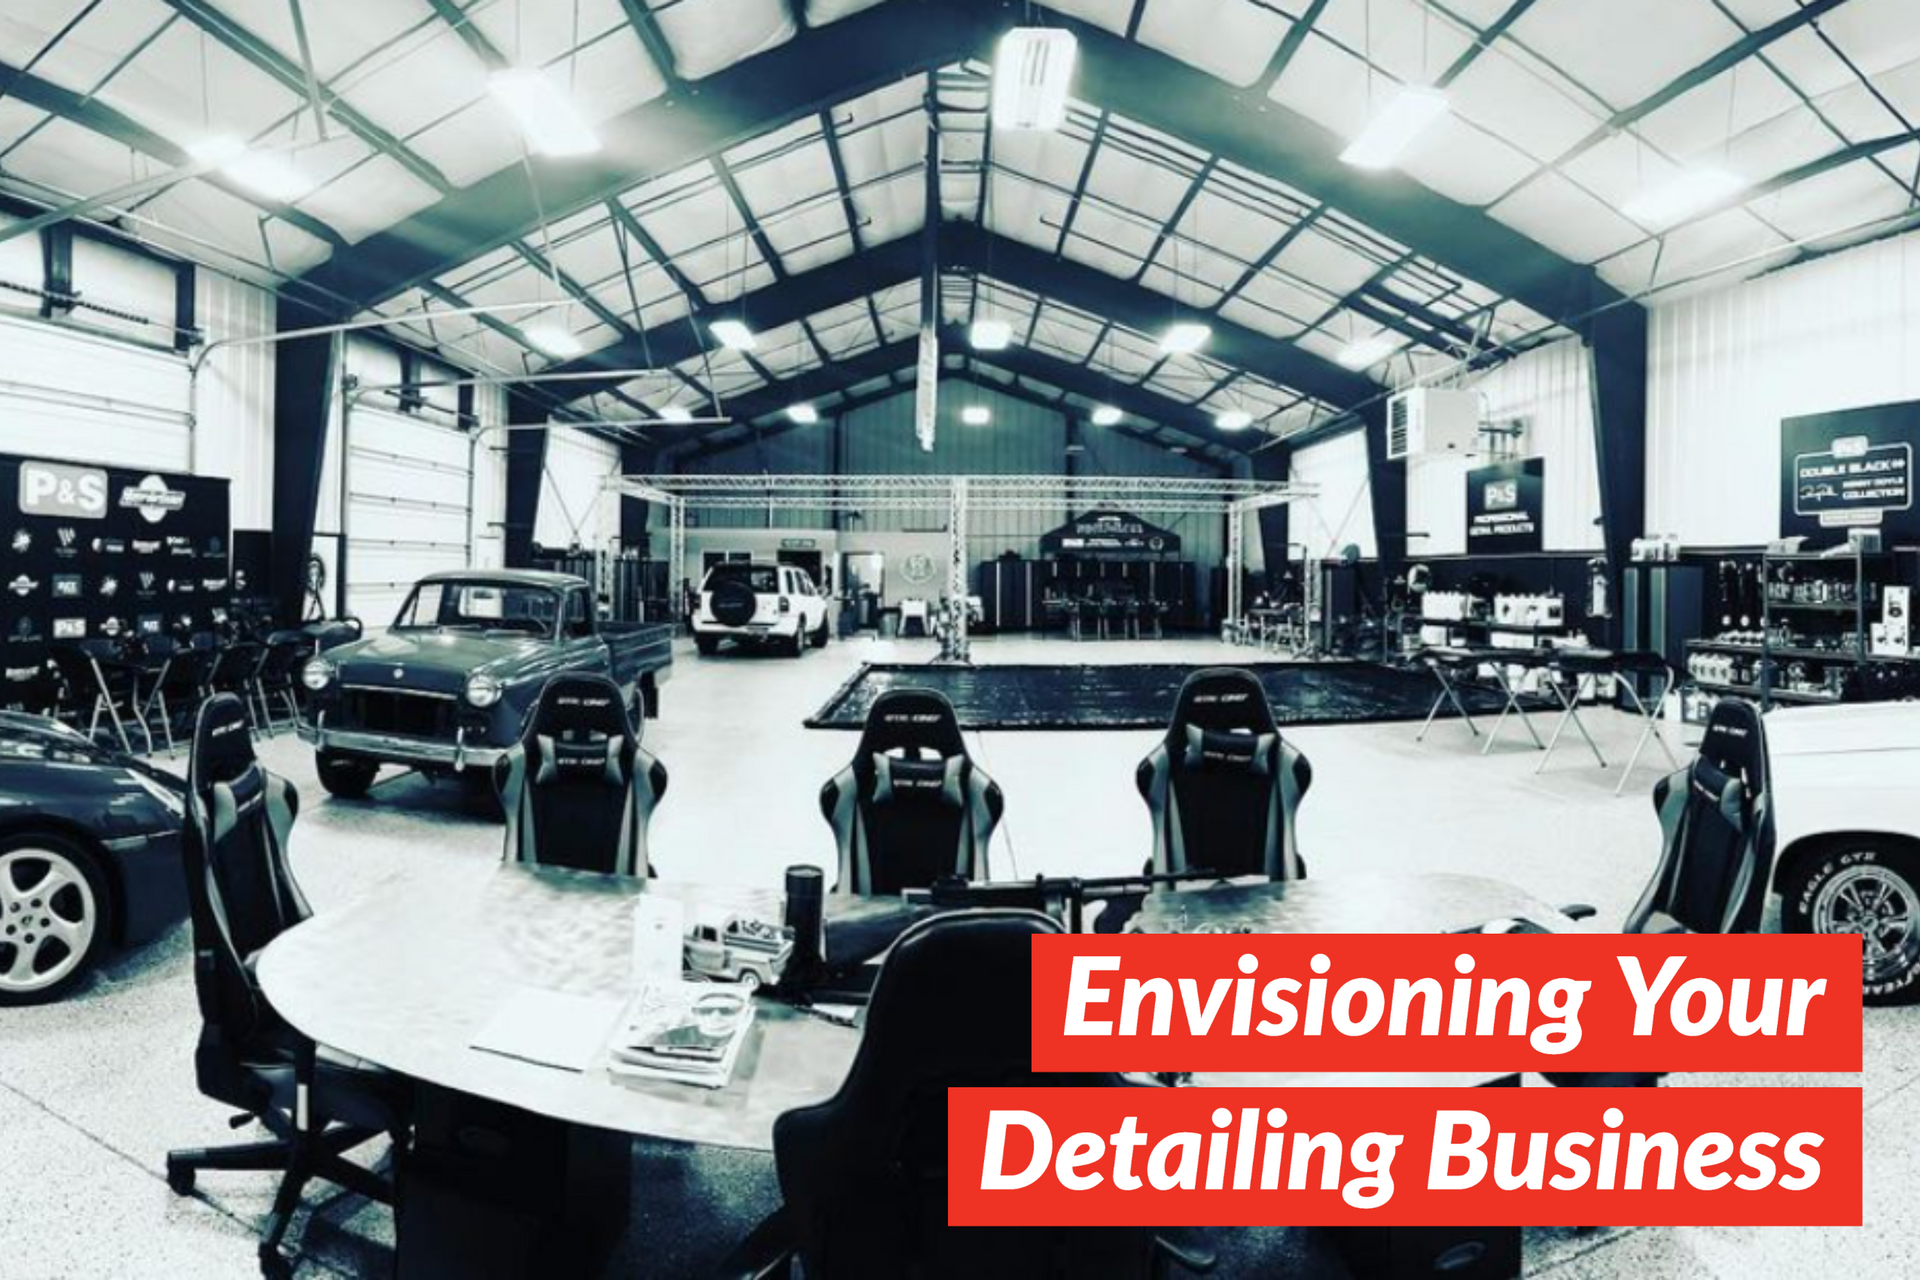 Envisioning Your Detailing Business